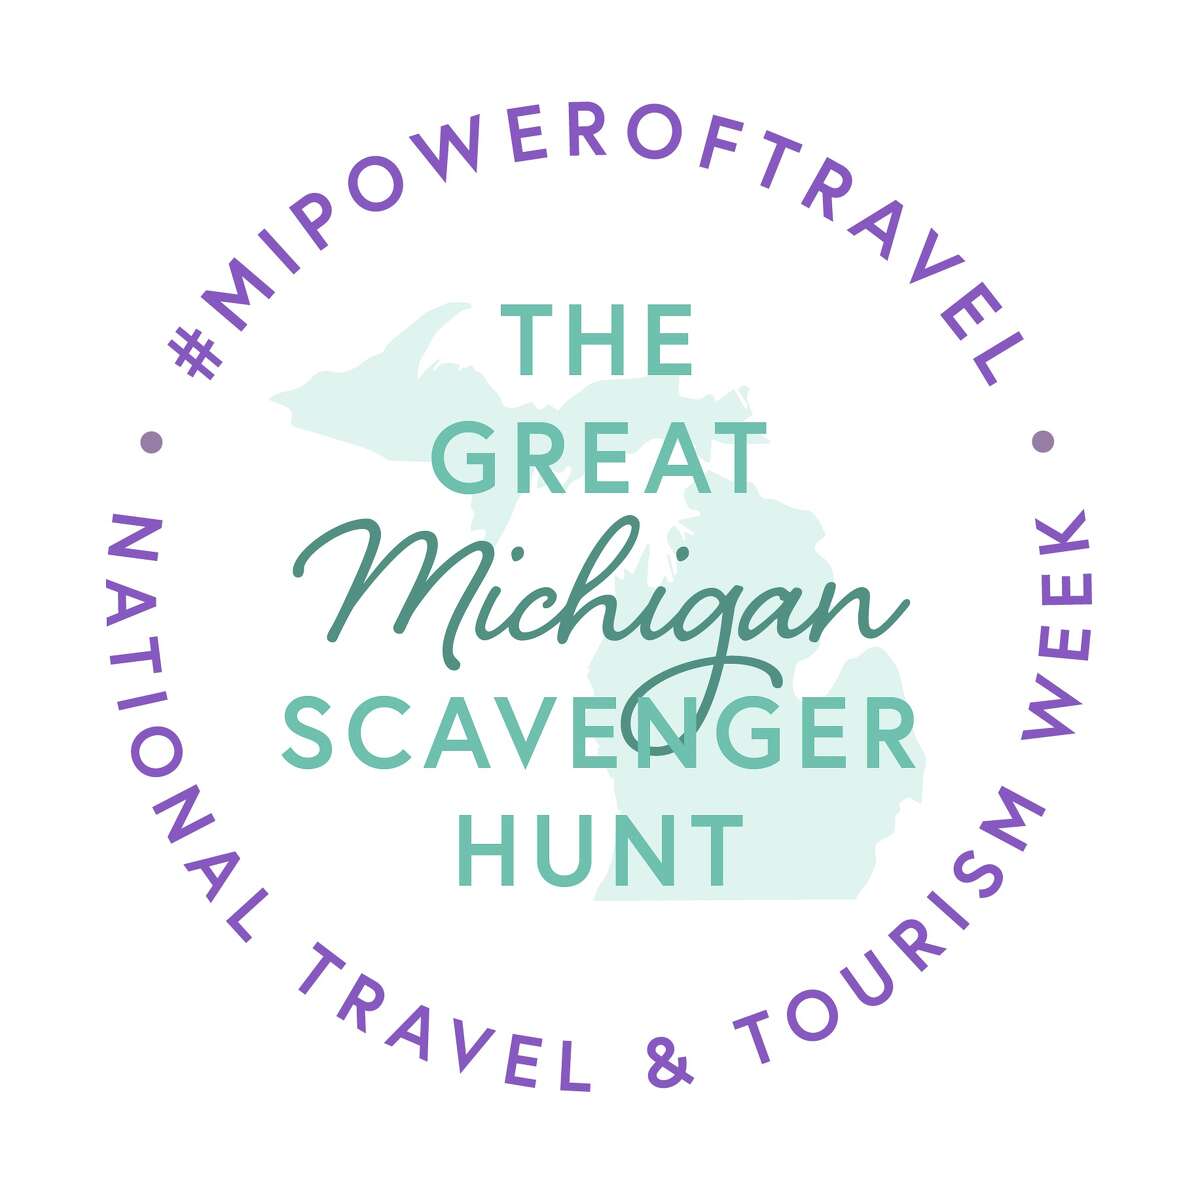 The Mecosta County Visitors Bureau is teaming up with other destinations around Michigan for a statewide scavenger hunt to celebrate National Travel and Tourism Week, May 1-7.